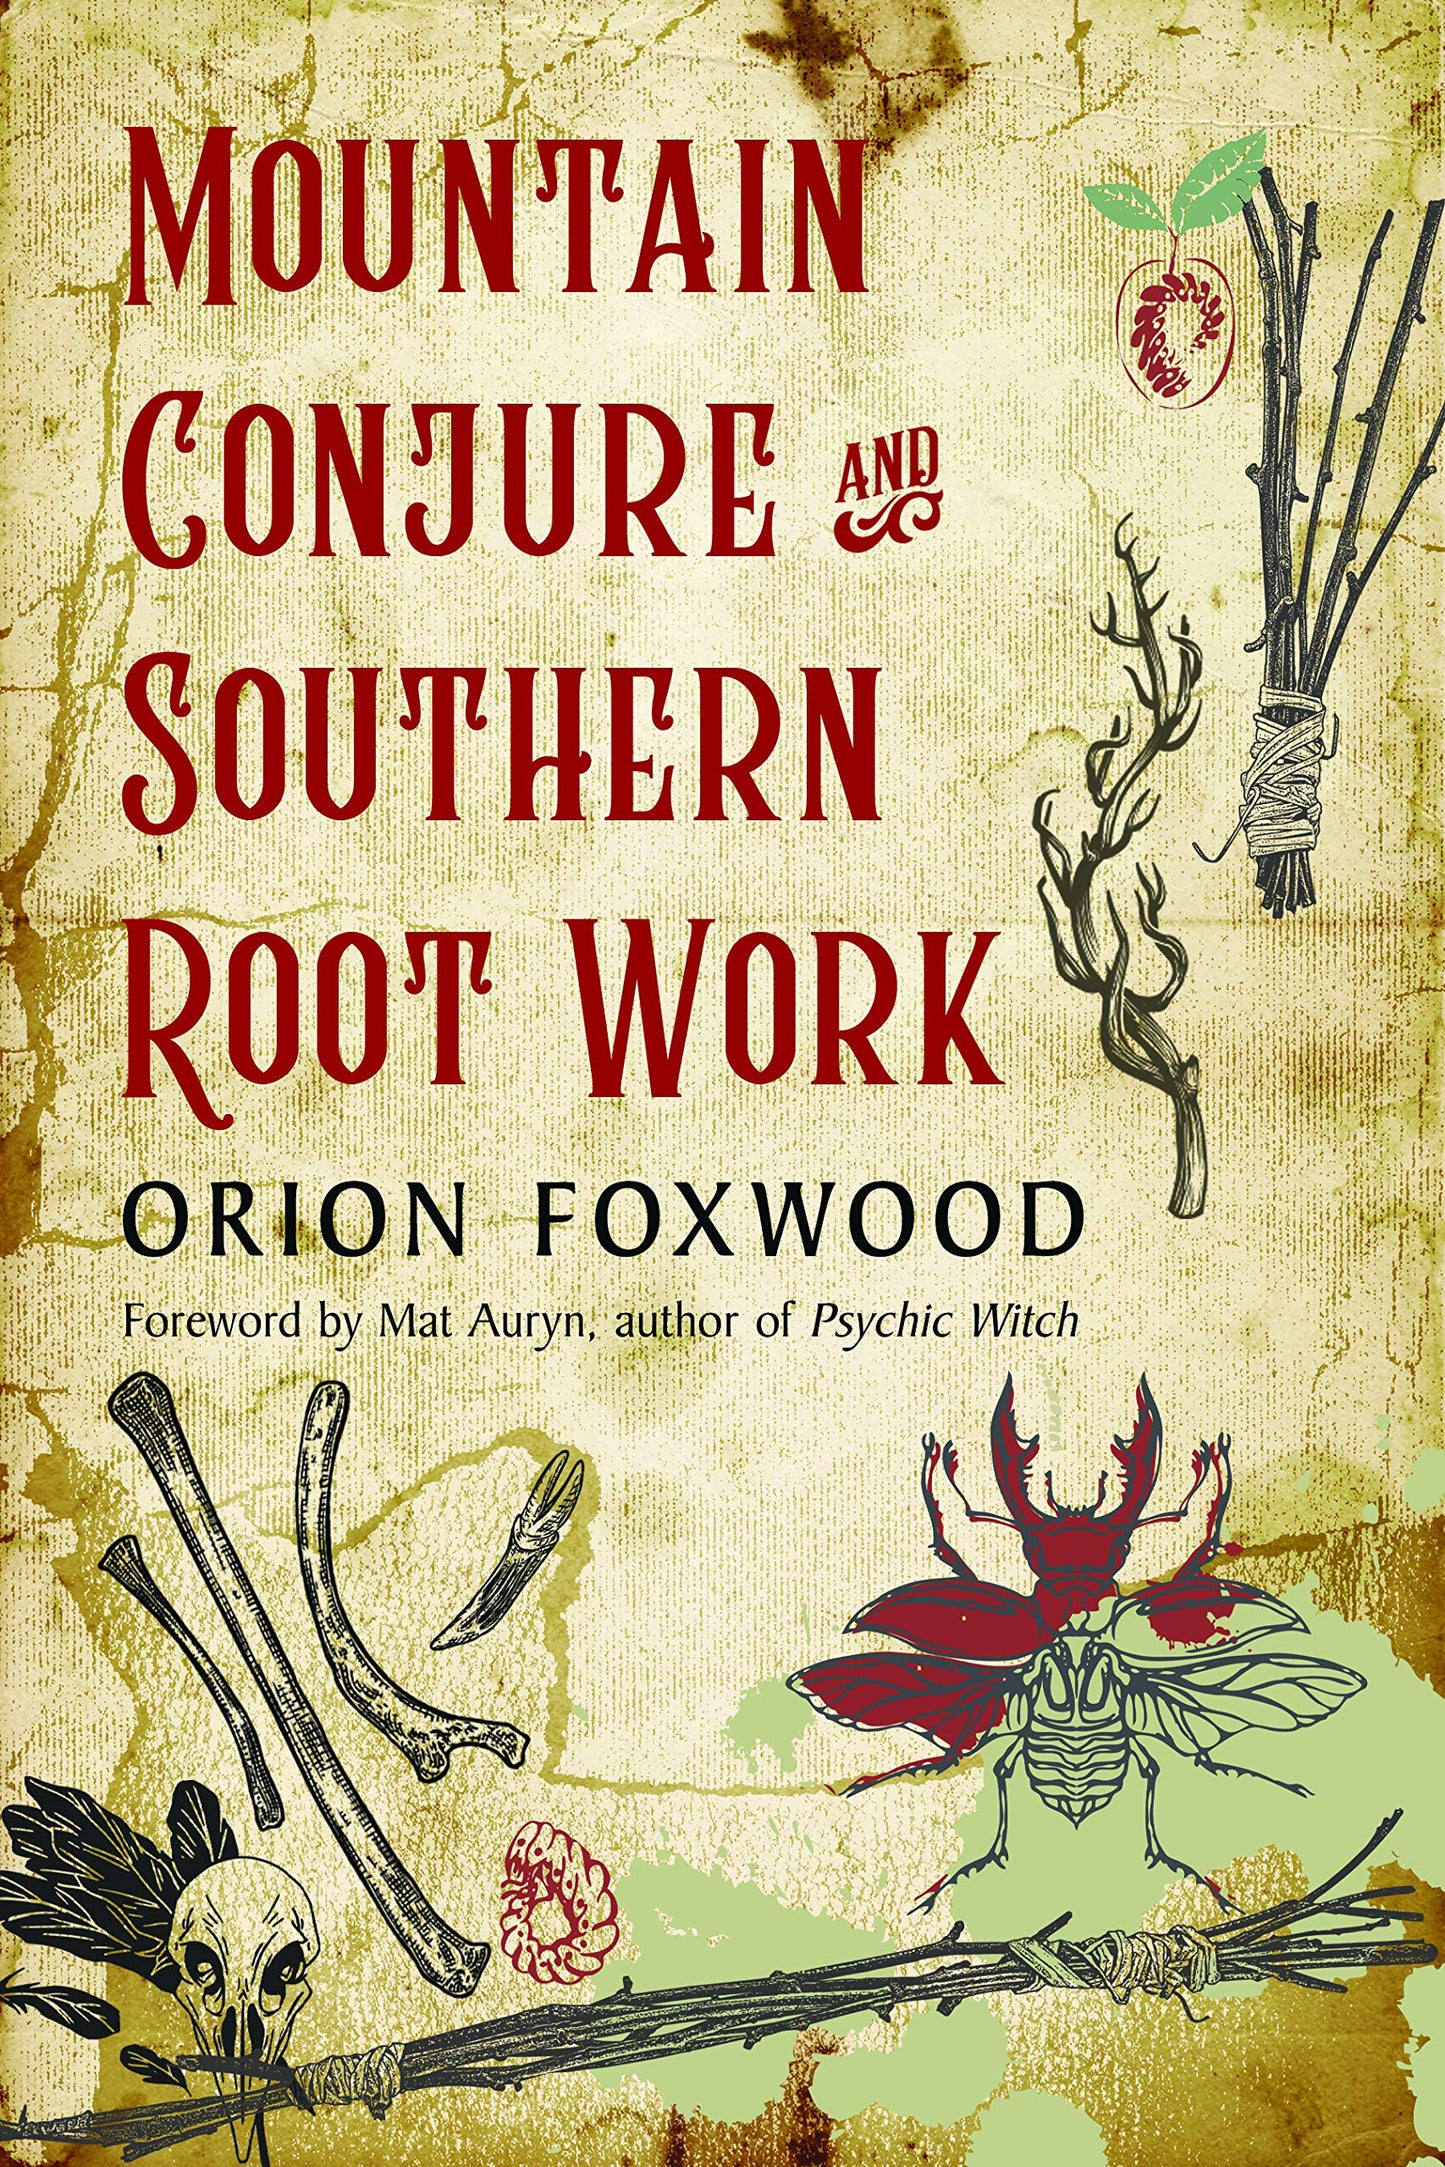 Mountain Conjure and Southern Root Work, by Orion Foxwood